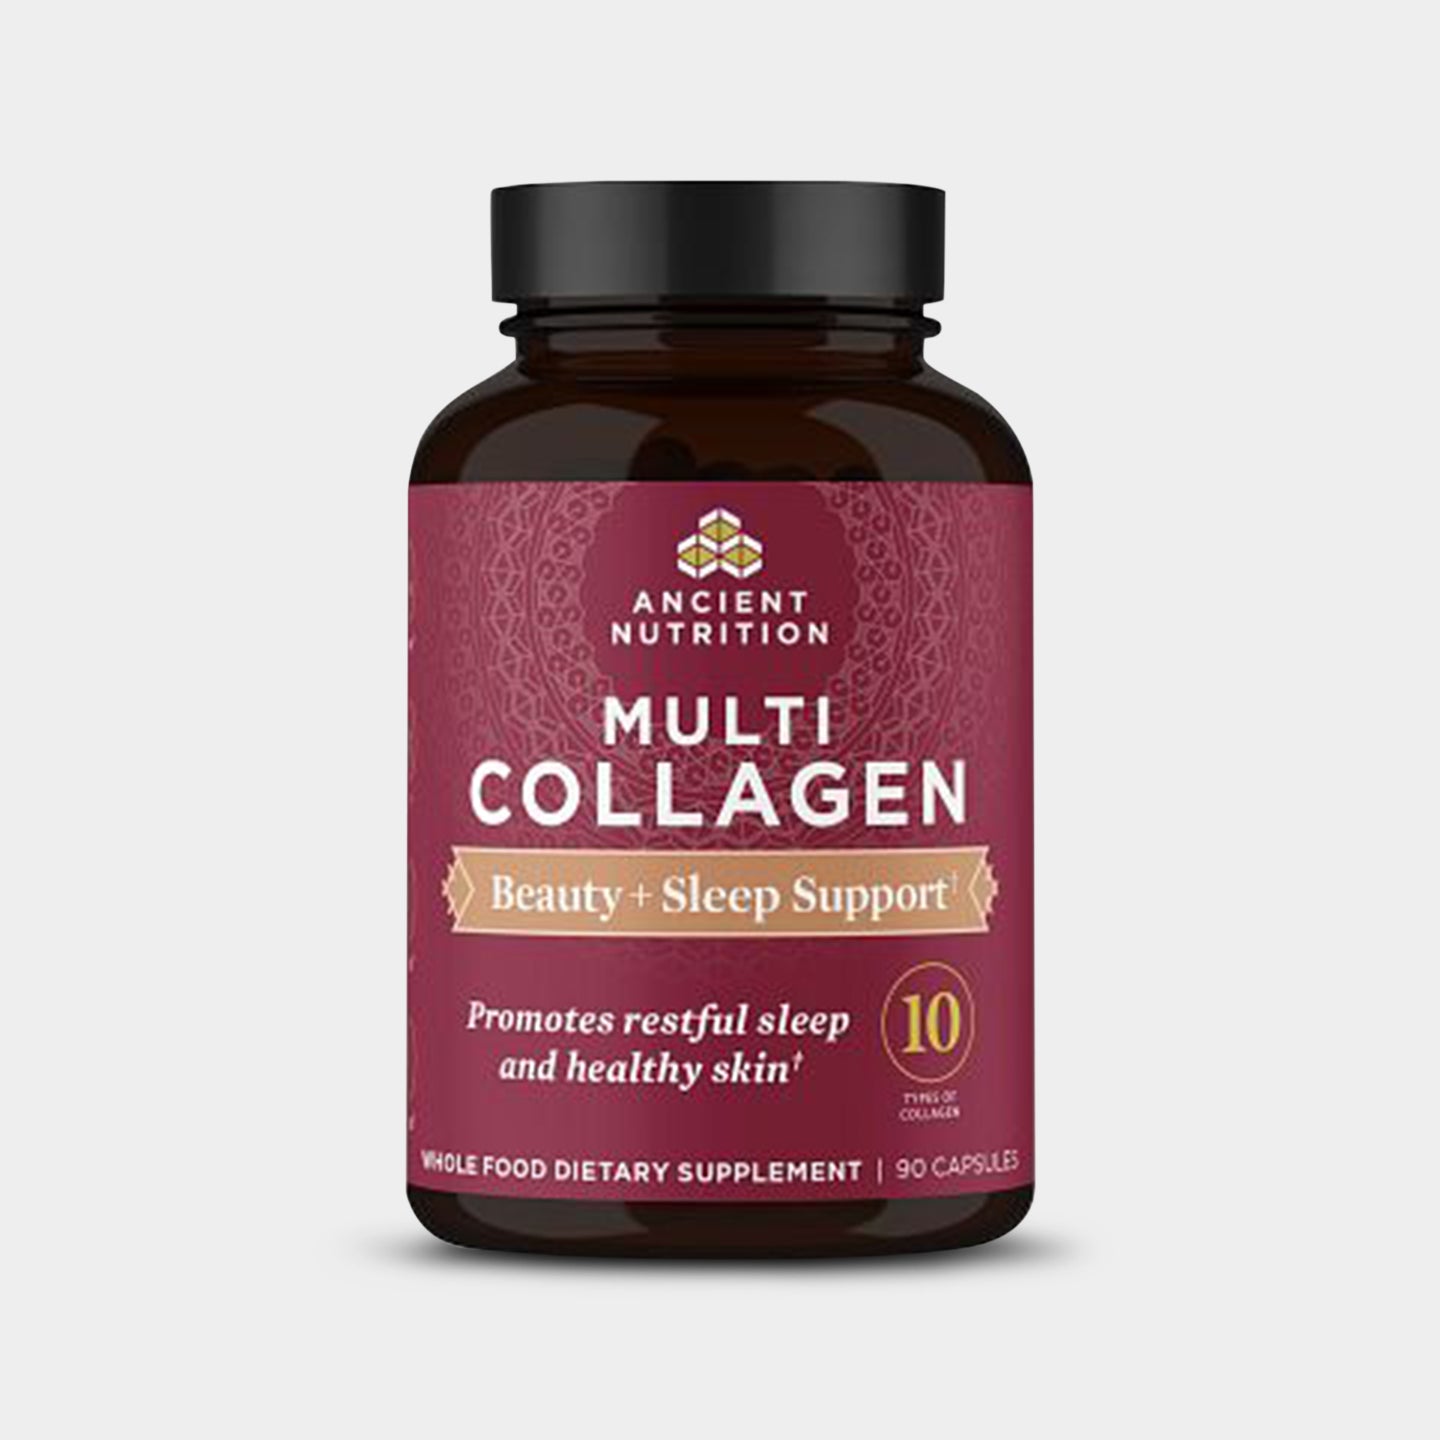 Ancient Nutrition Multi Collagen - Beauty + Sleep Support A1